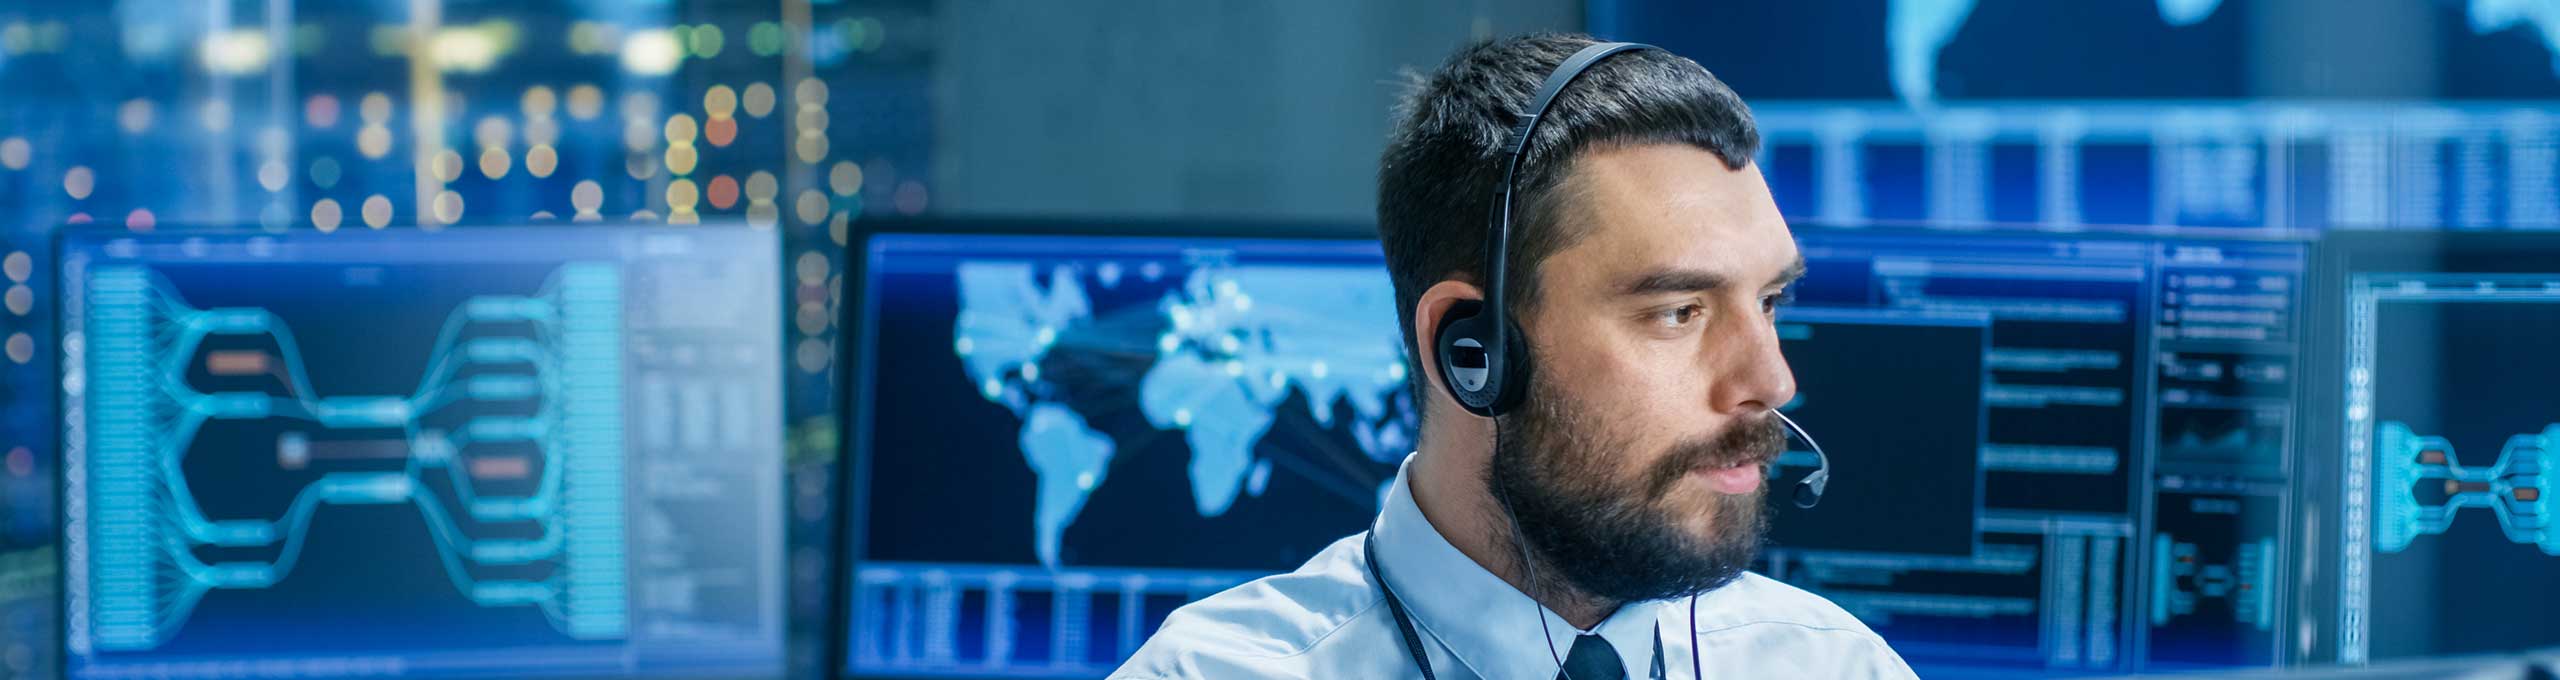 man with headset using HxGN OnCall software